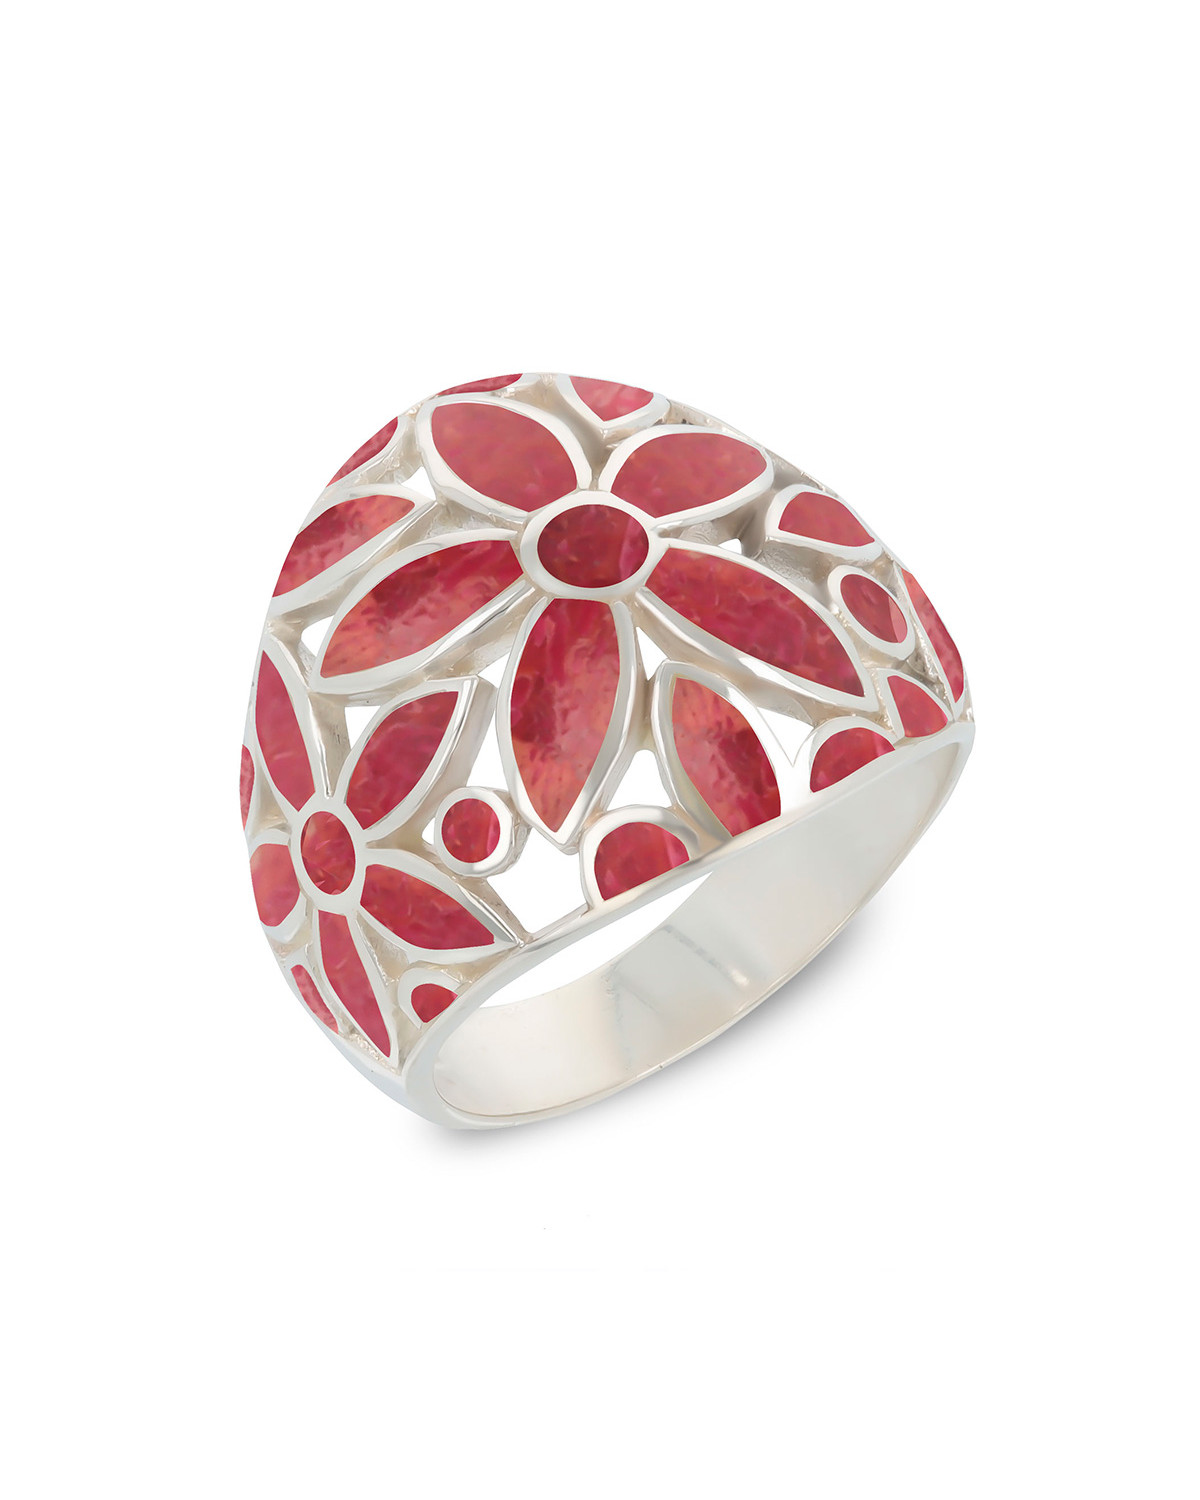 Red Farmed Coral and Sterling Silver Flower Motif Ring - Elegant and Floral Jewel | ADEN